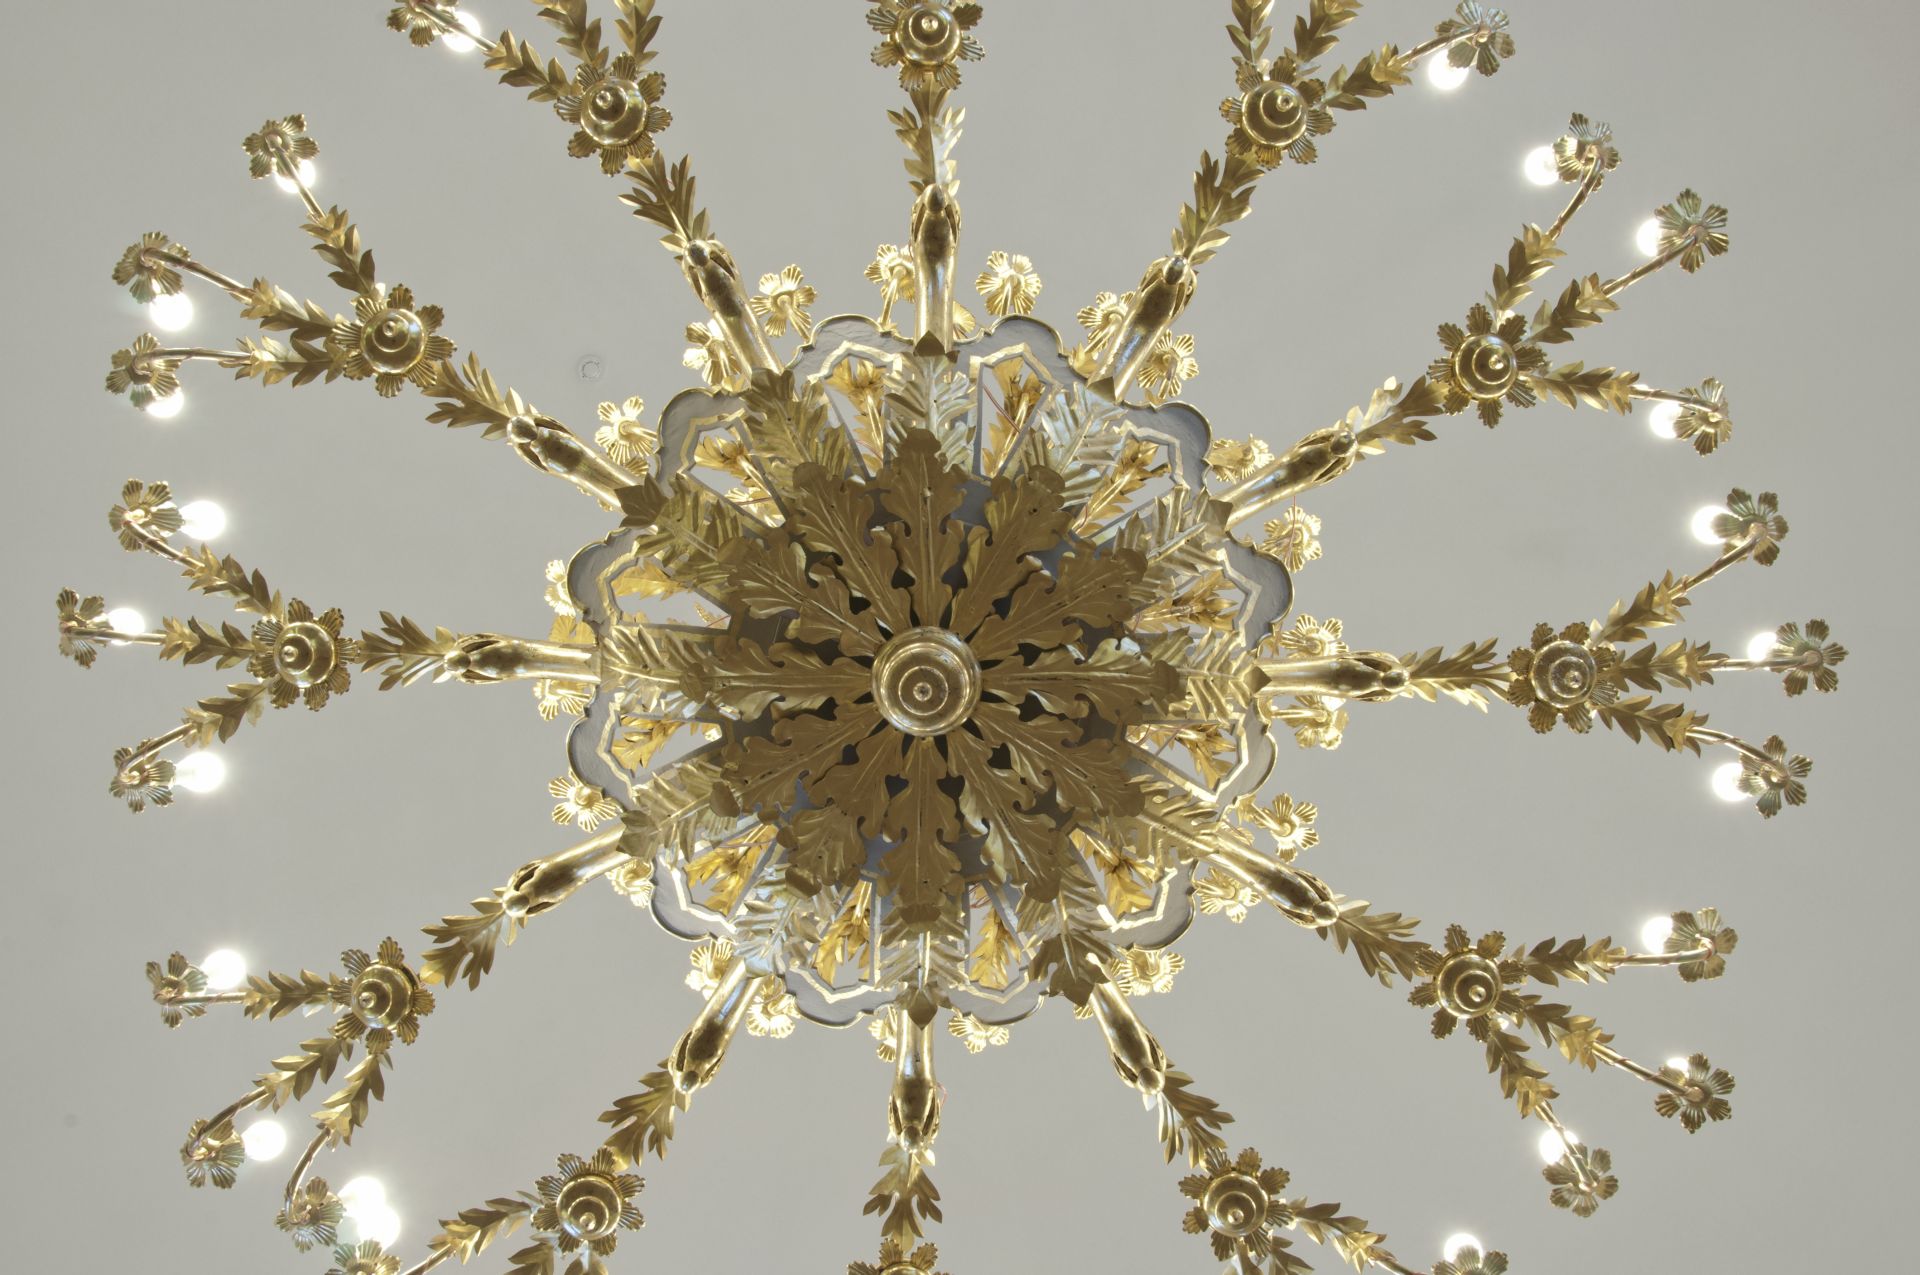 Fragment of chandelier, 1787–1803, Lithuanian National Museum of Art, TM-521. Photo by Paulius Makauskas, 2017